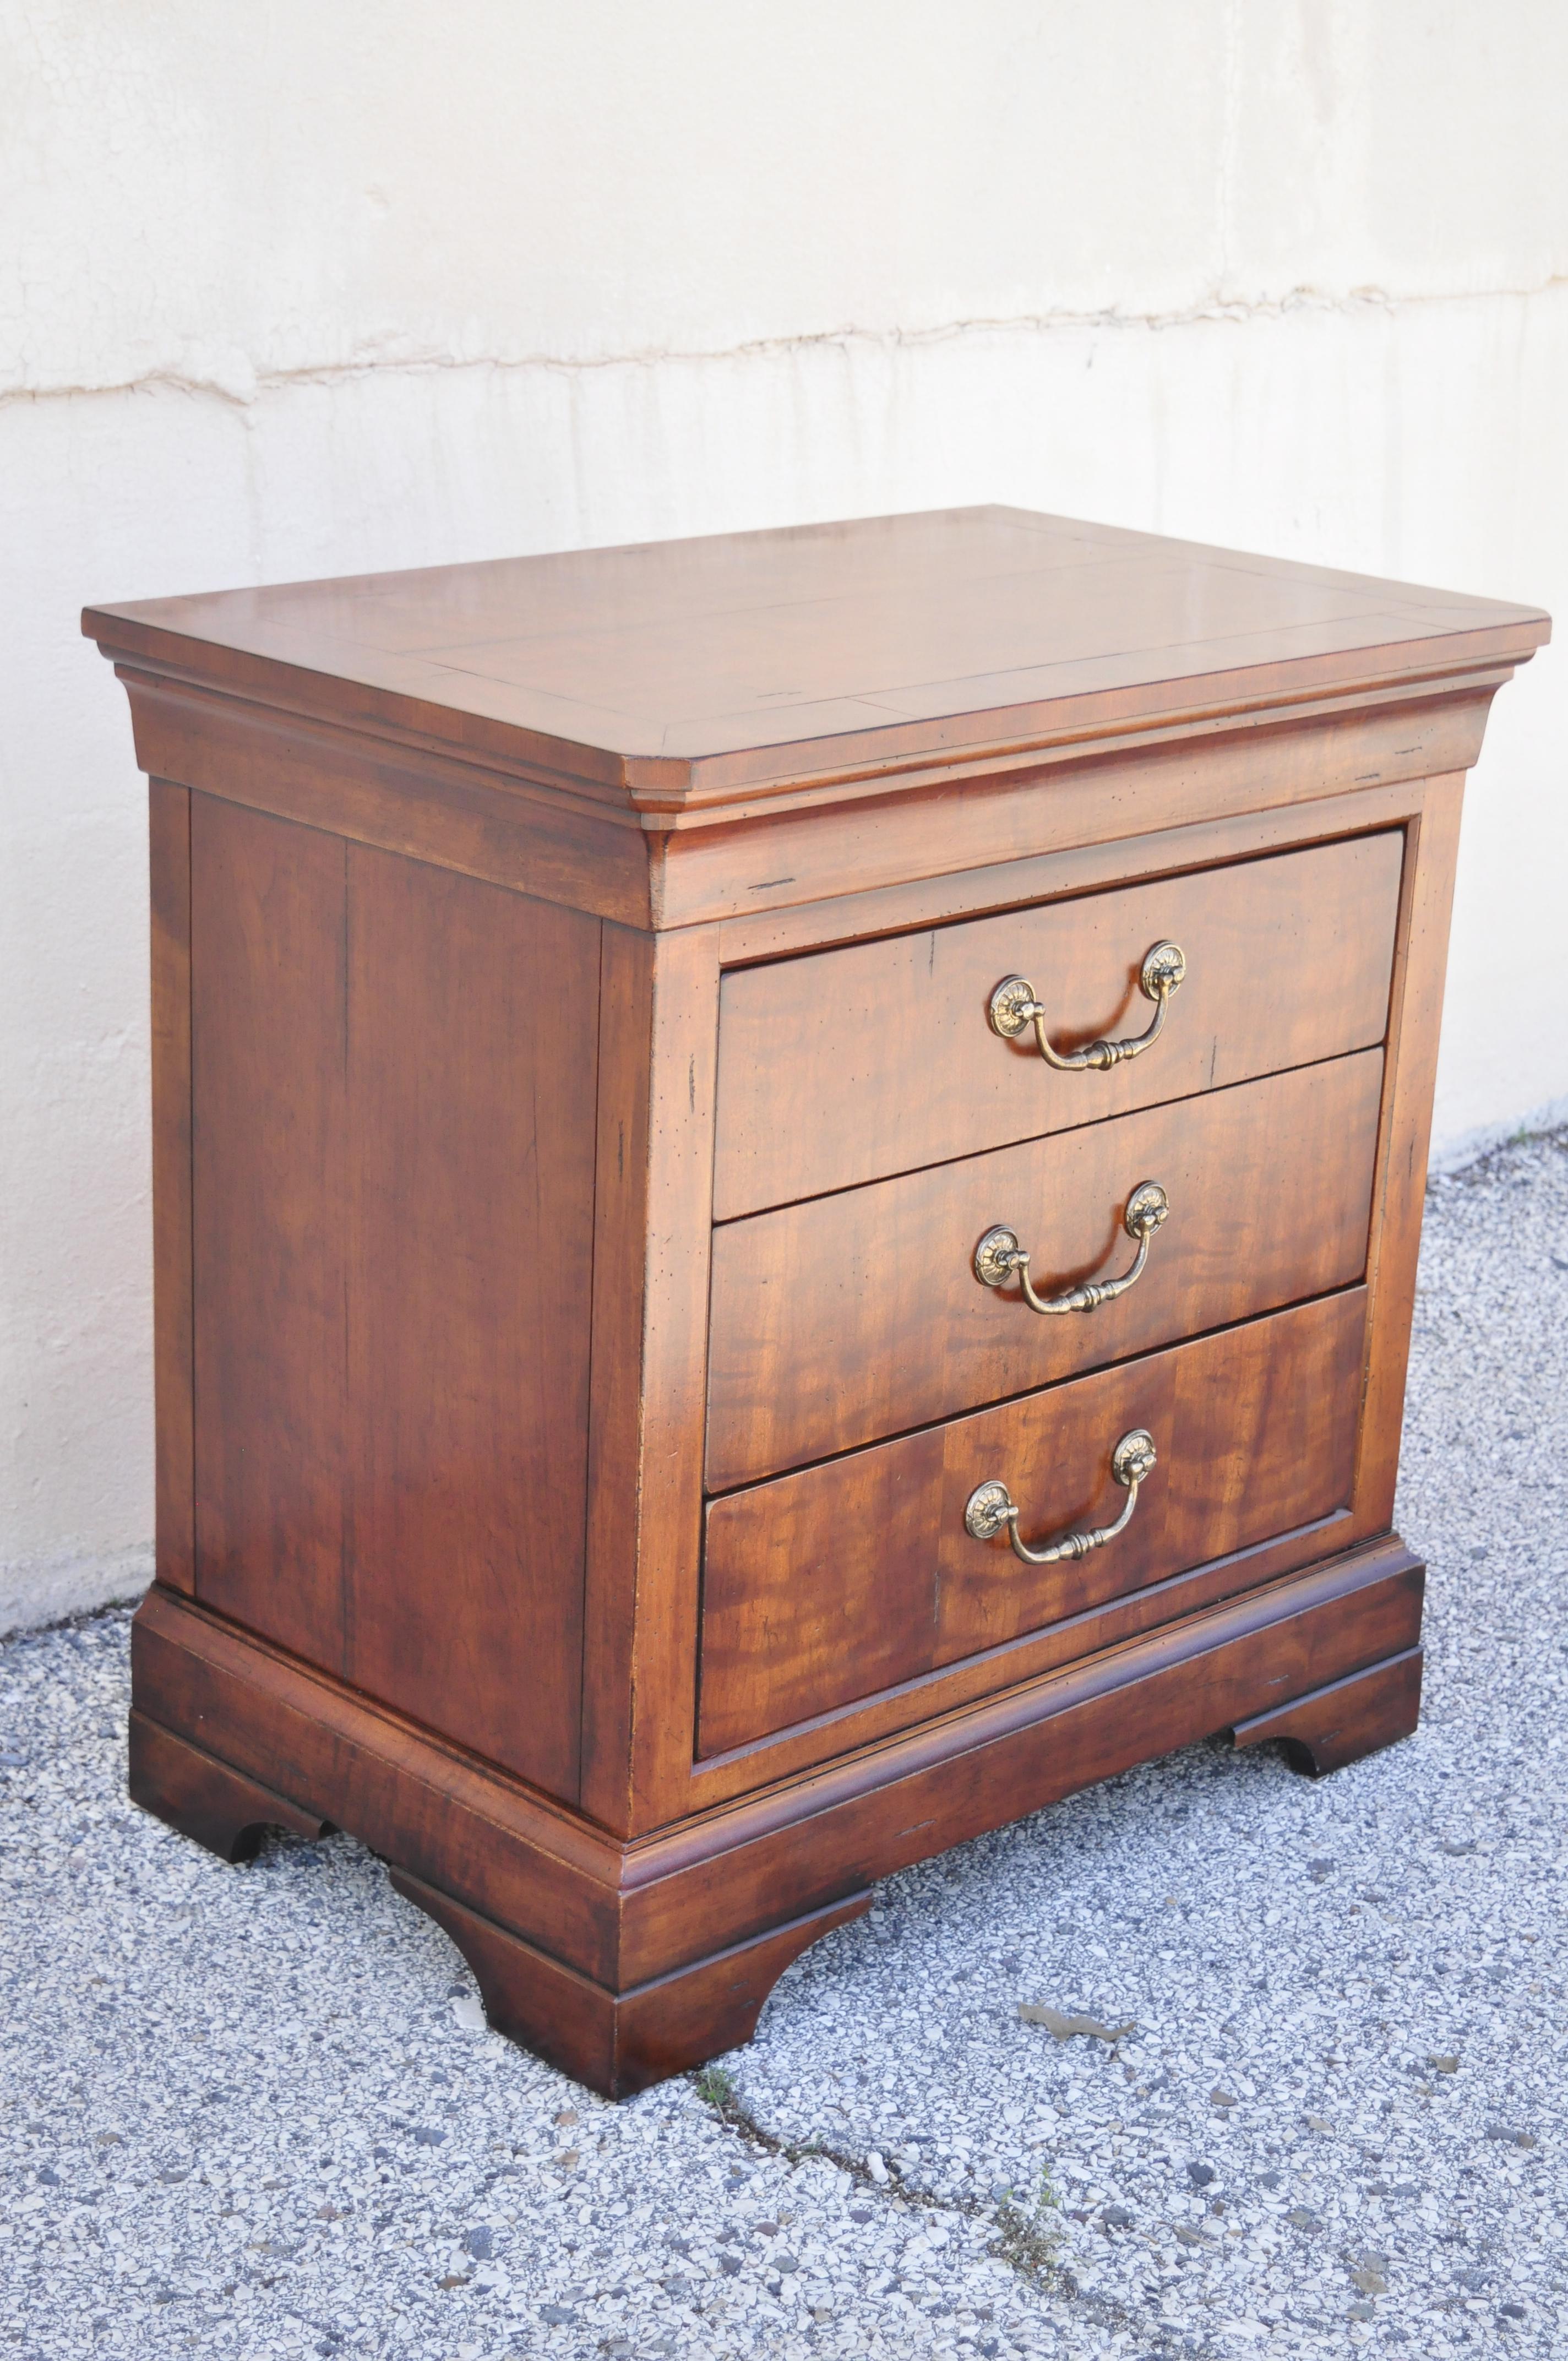 Henredon cavalier aged cherry wood 3 drawer nightstand bedside table. Item features large impressive size, solid wood construction, beautiful wood grain, distressed finish, original label, 3 dovetailed drawers, quality American craftsmanship, great